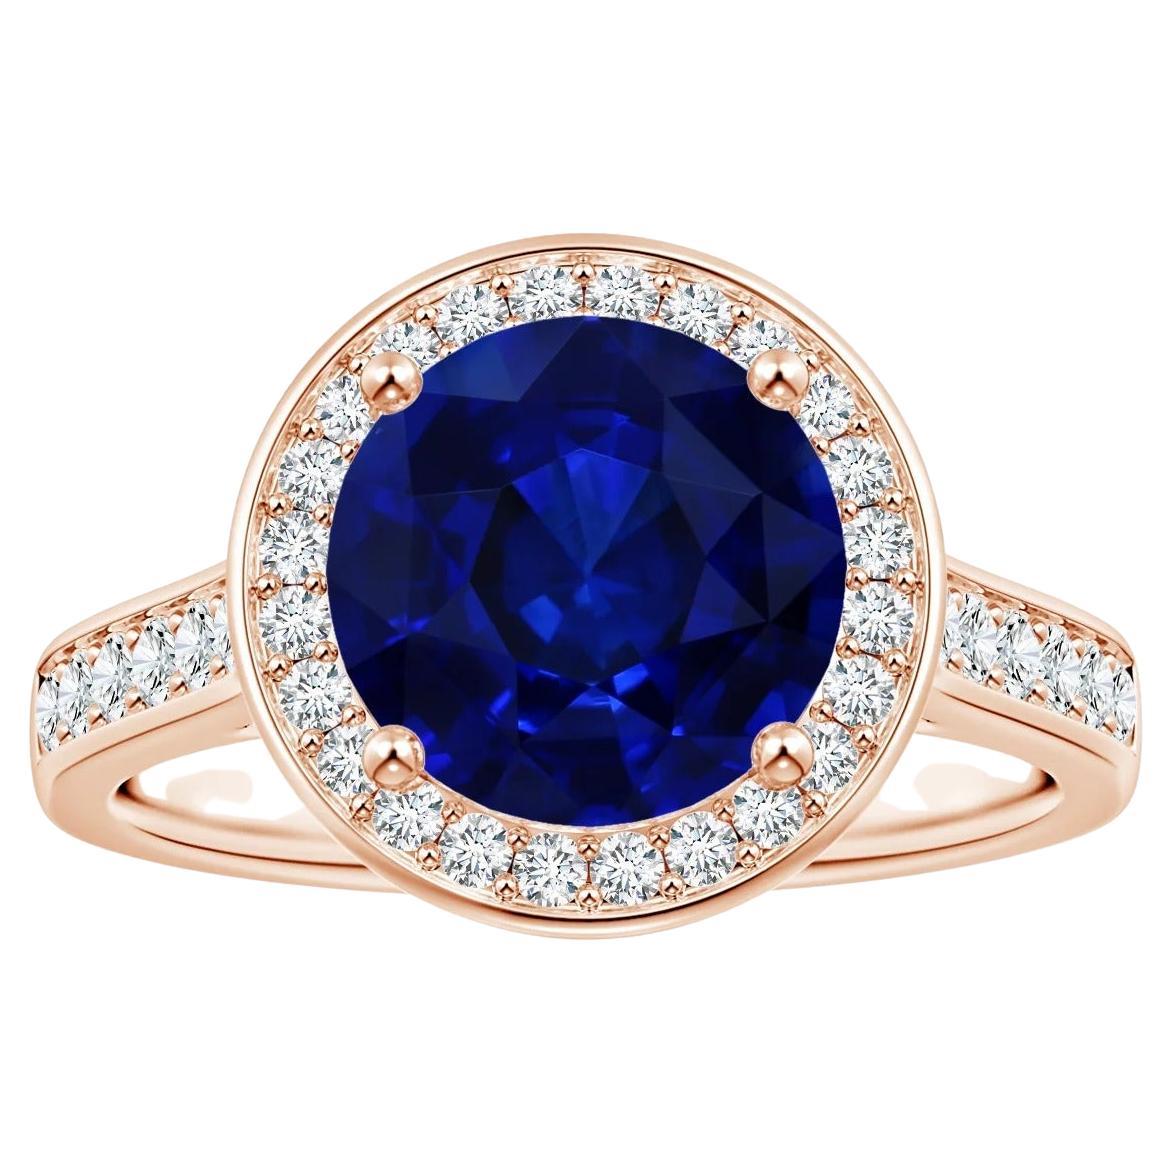 For Sale:  Angara Gia Certified Blue Sapphire Halo Ring in Rose Gold with Diamonds